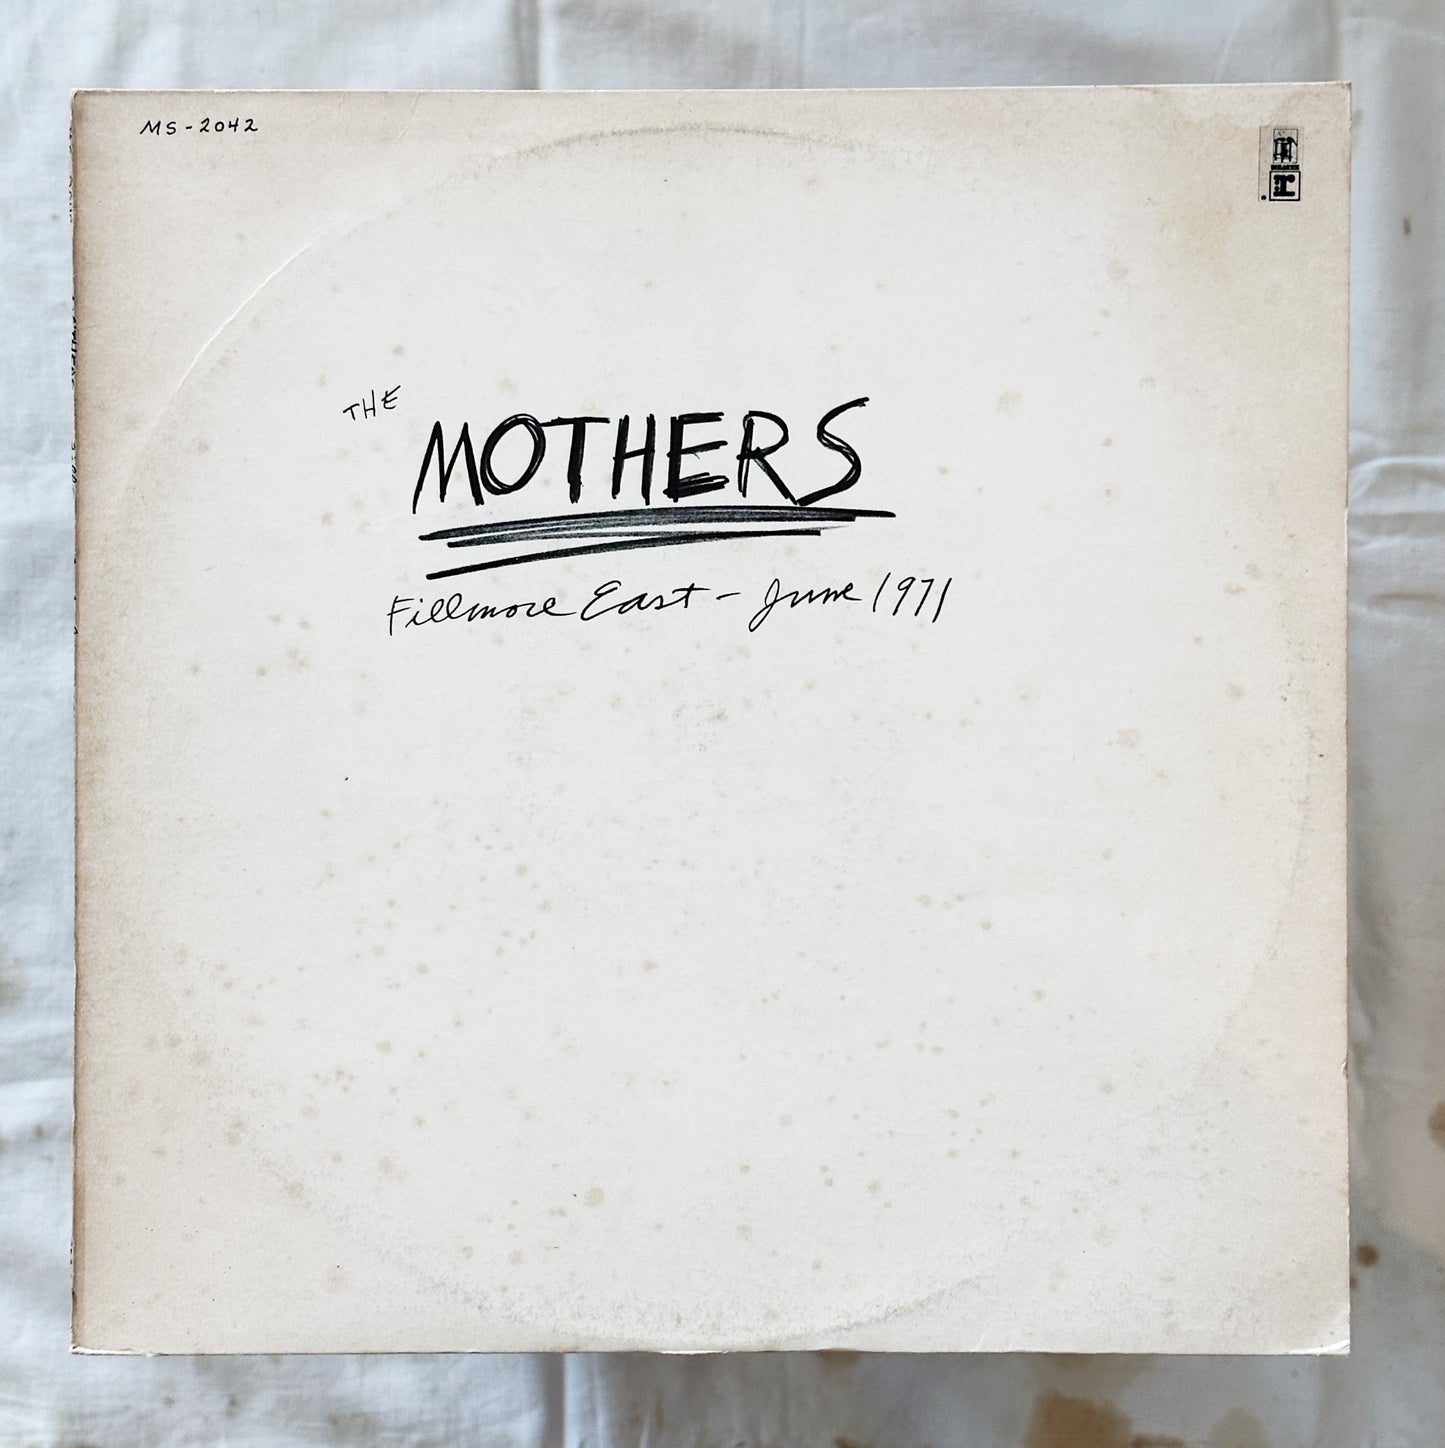 The Mothers / Live at Fillmore East - June 1971 LP